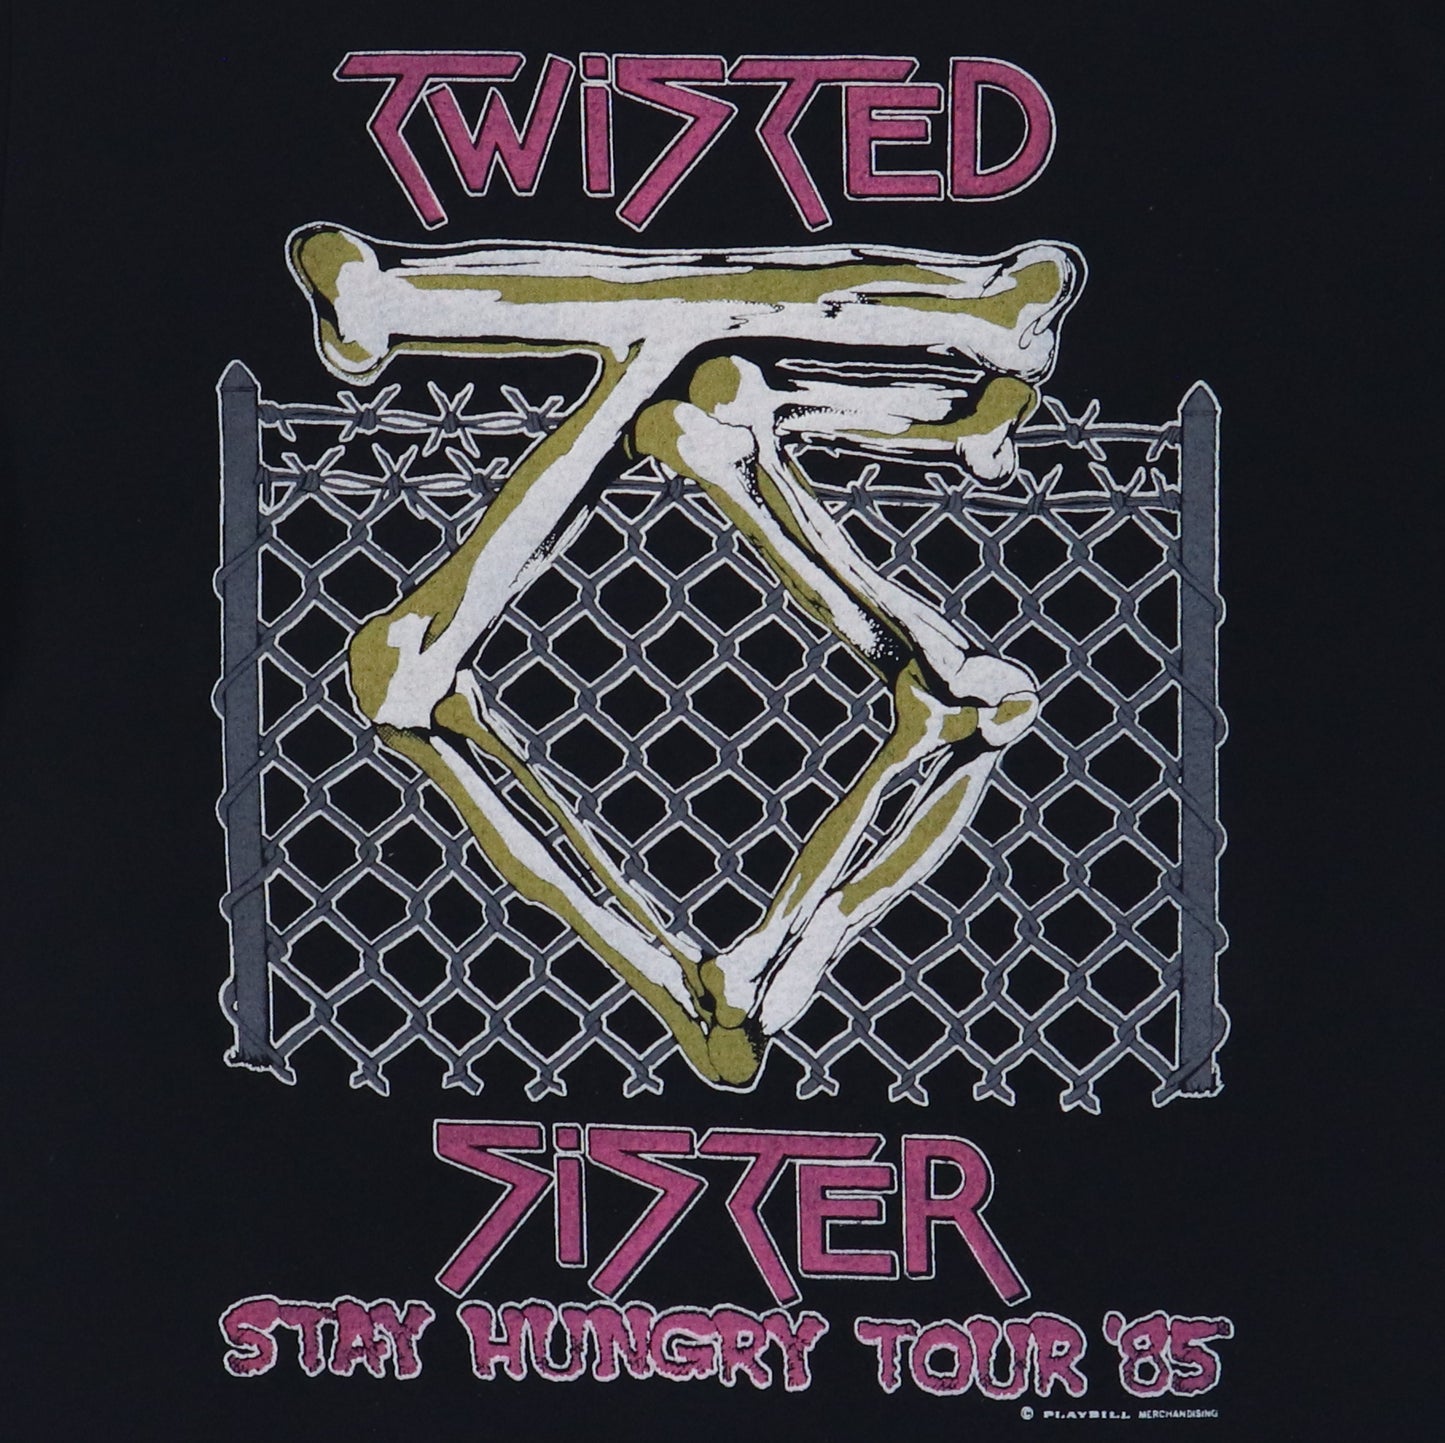 twisted sister logo